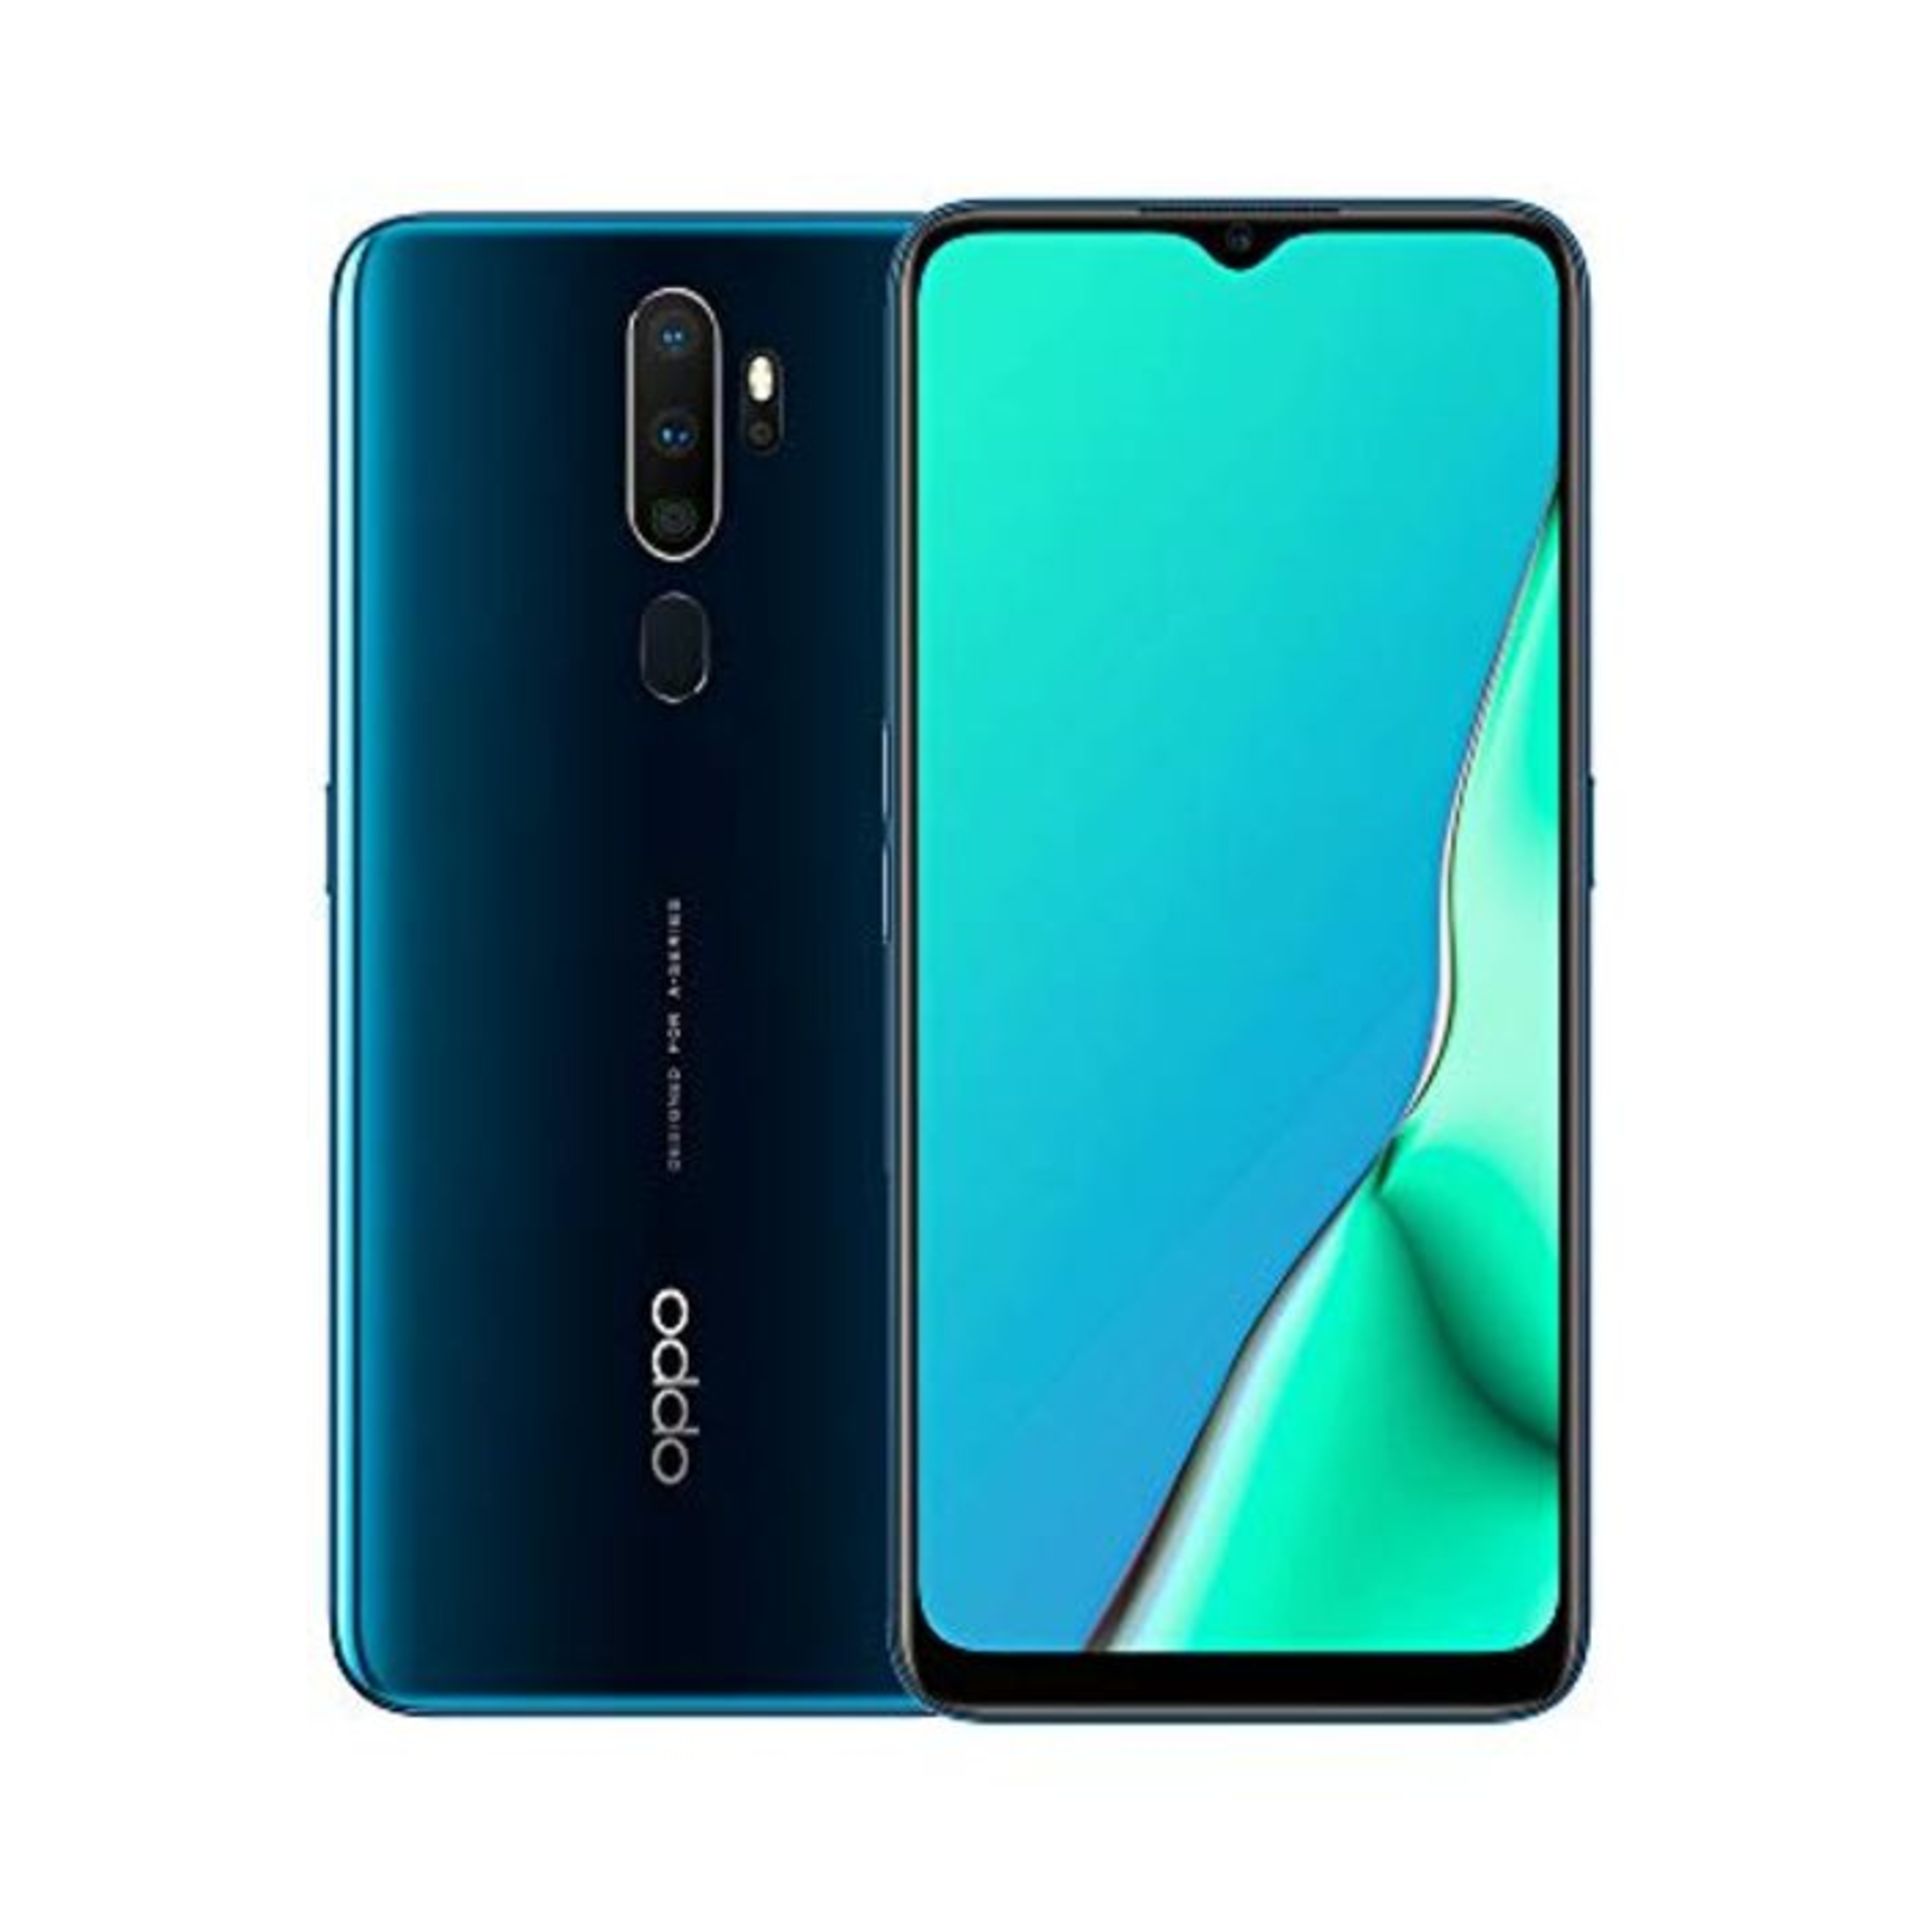 RRP £149.00 Cracked screen- OPPO A9 2020 Snapdragon 665 6.5 inch 5000mAh Dual Sim 48MP Ultra Wide